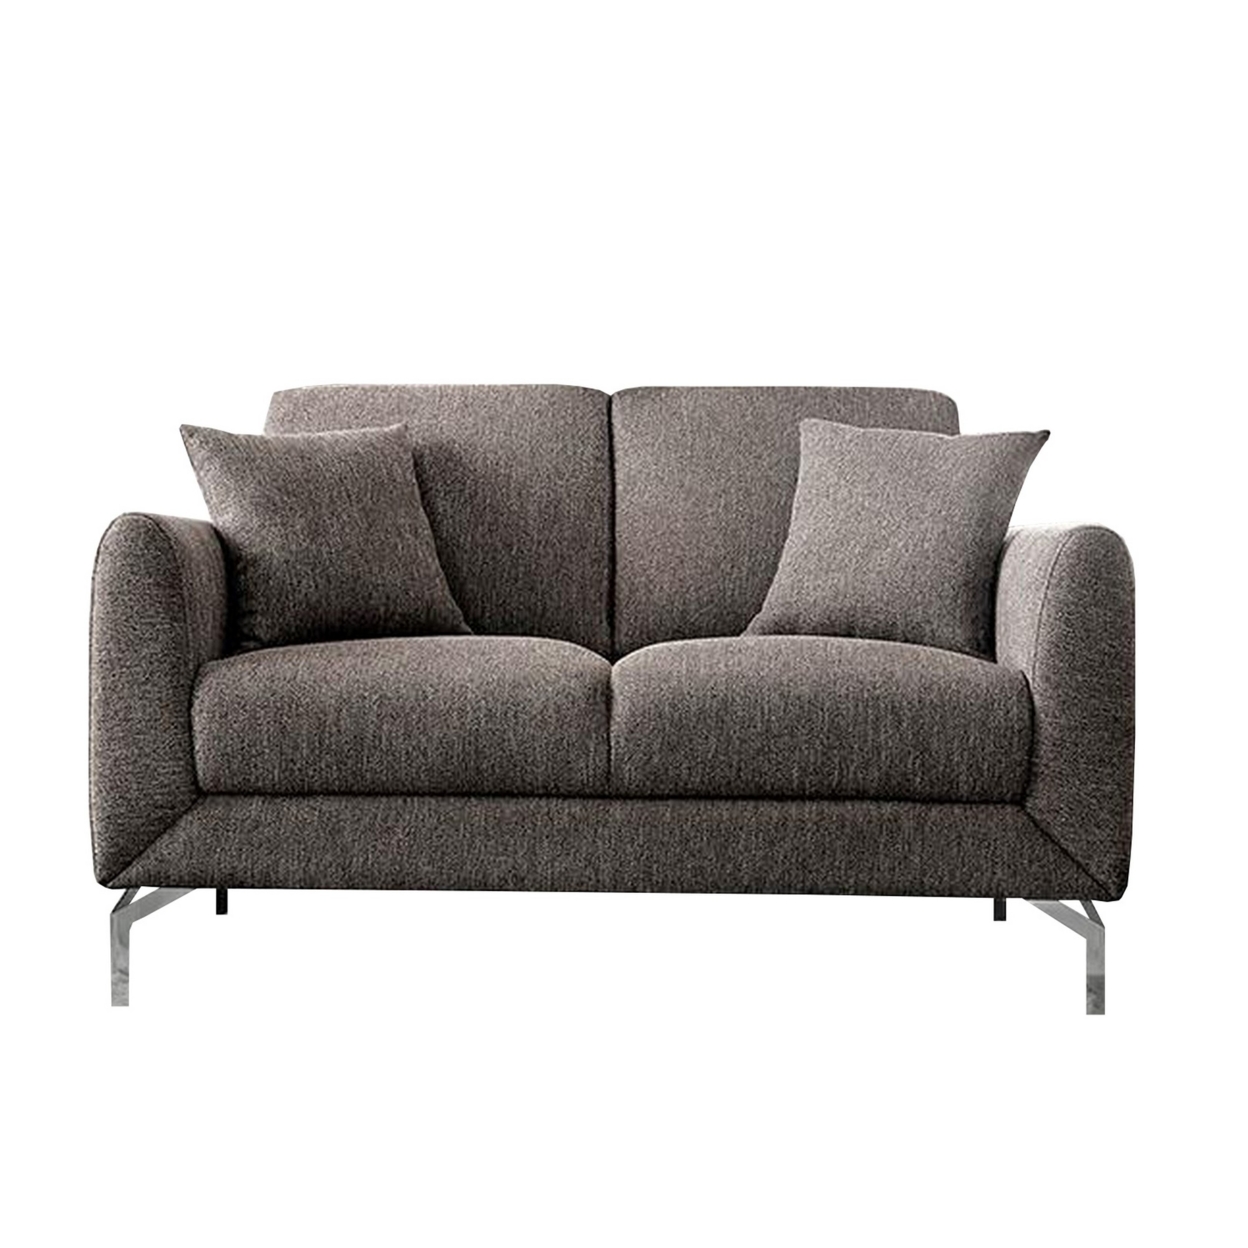 54 Inches Loveseat With Fabric Padded Seat And Metal Legs, Gray- Saltoro Sherpi